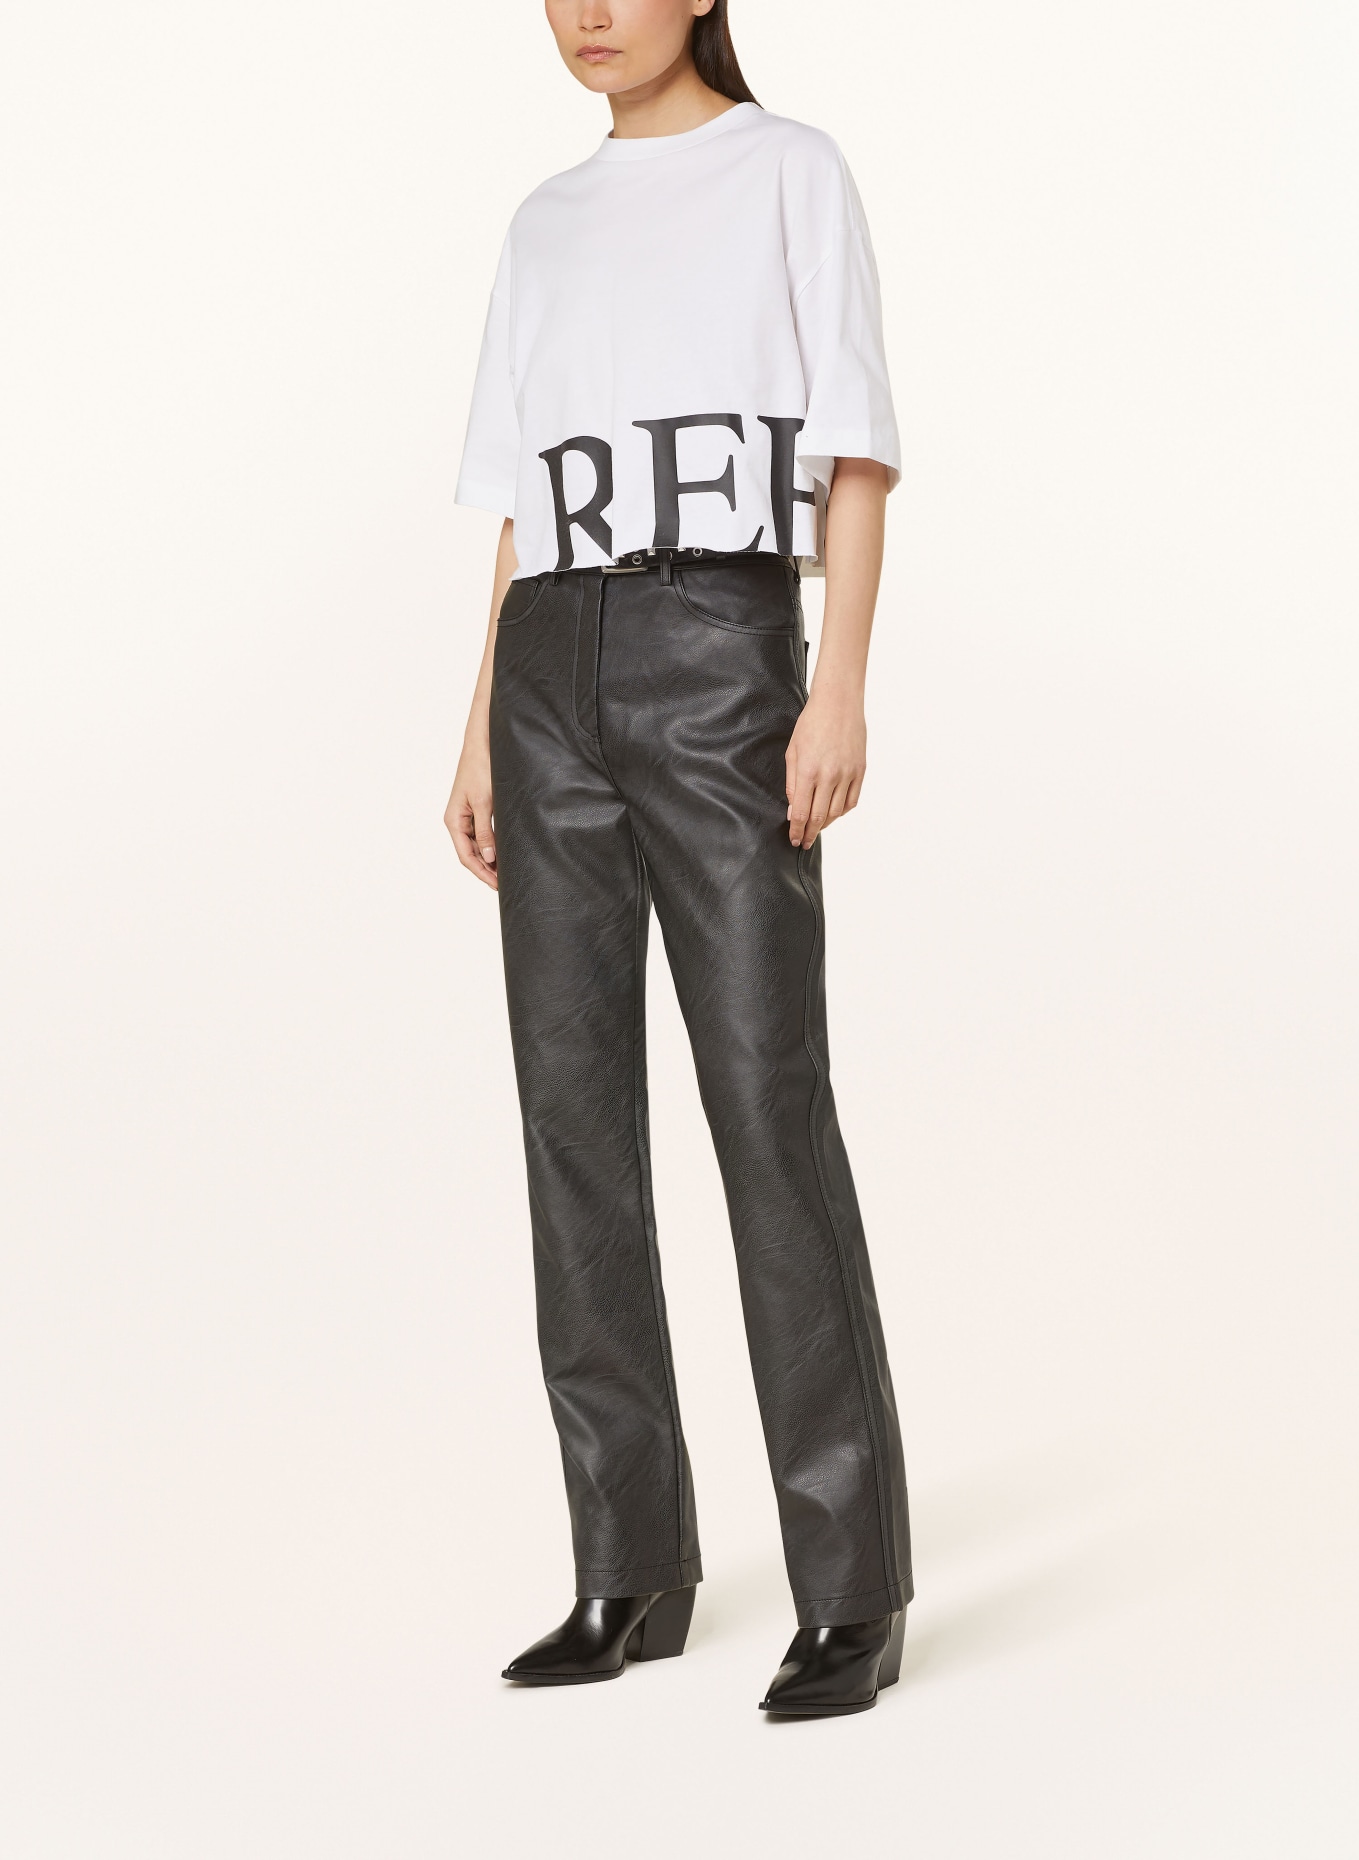 REPLAY Cropped-Shirt, Farbe: WEISS (Bild 2)